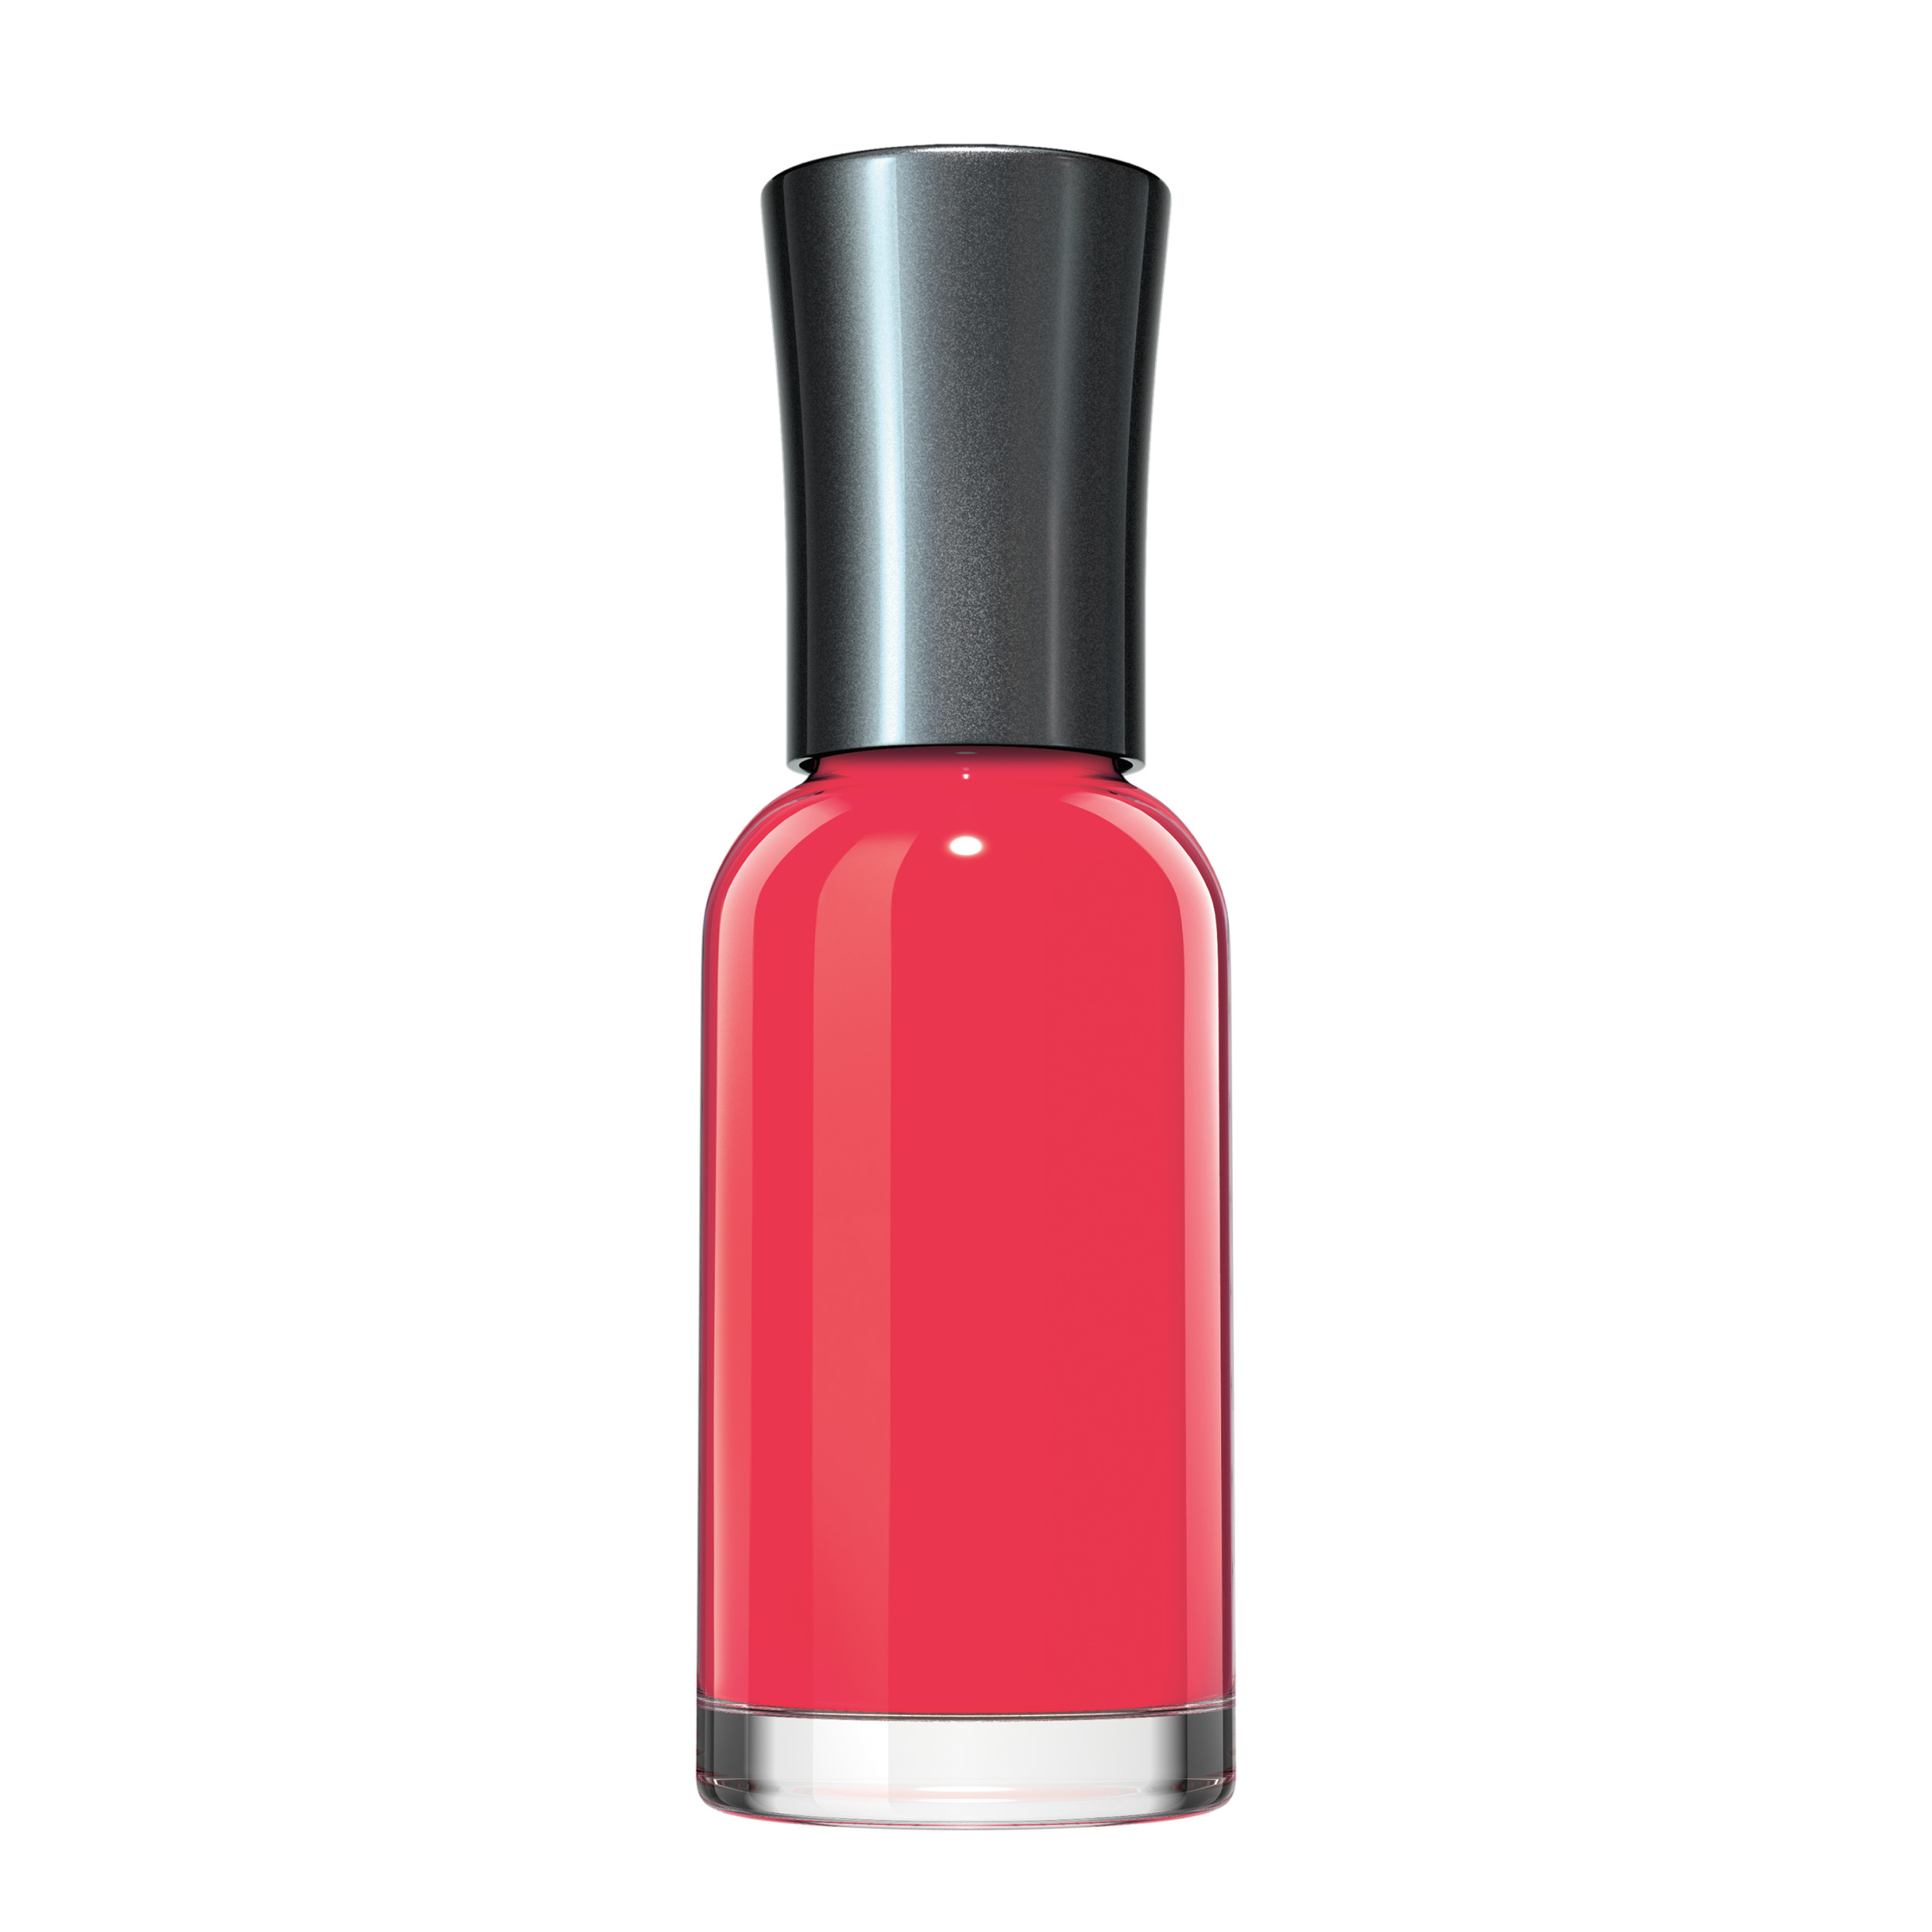 Sally Hansen Xtreme Wear Nail Color, Rebel Red, 0.4 oz, Color Nail Polish, Nail Polish, Quick Dry Nail Polish, Nail Polish Colors, Chip Resistant, Bold Color - image 9 of 14